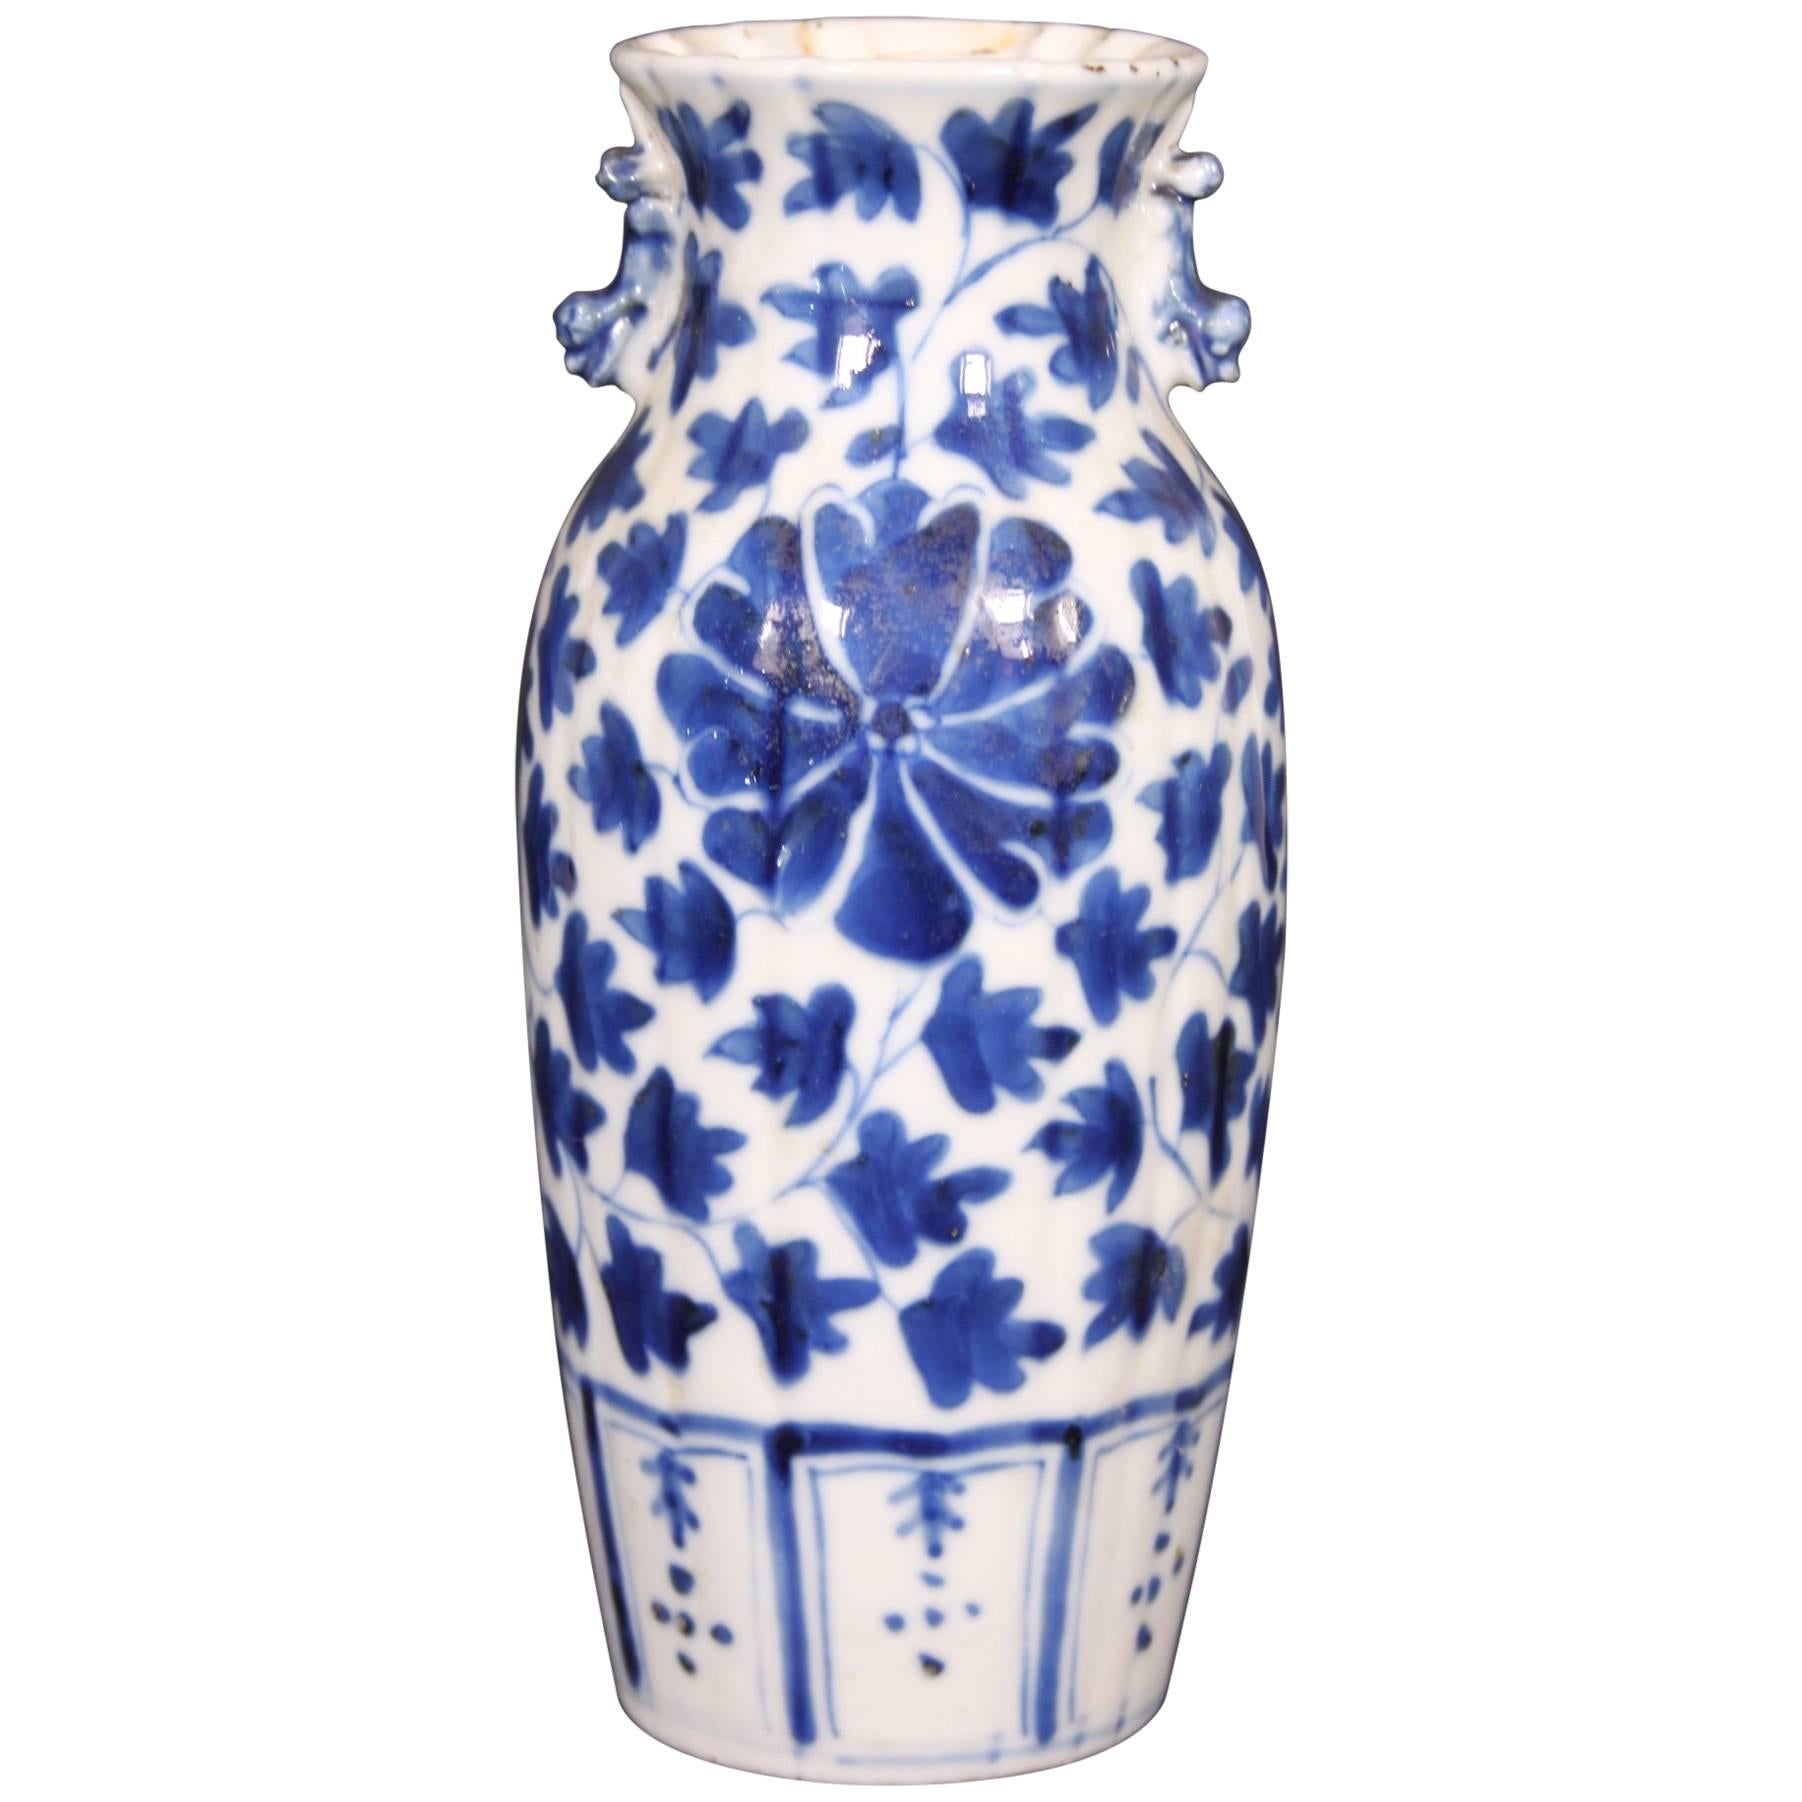 Chinese Blue and White Porcelain Vase Qing Dynasty Period, Circa 1900 For Sale